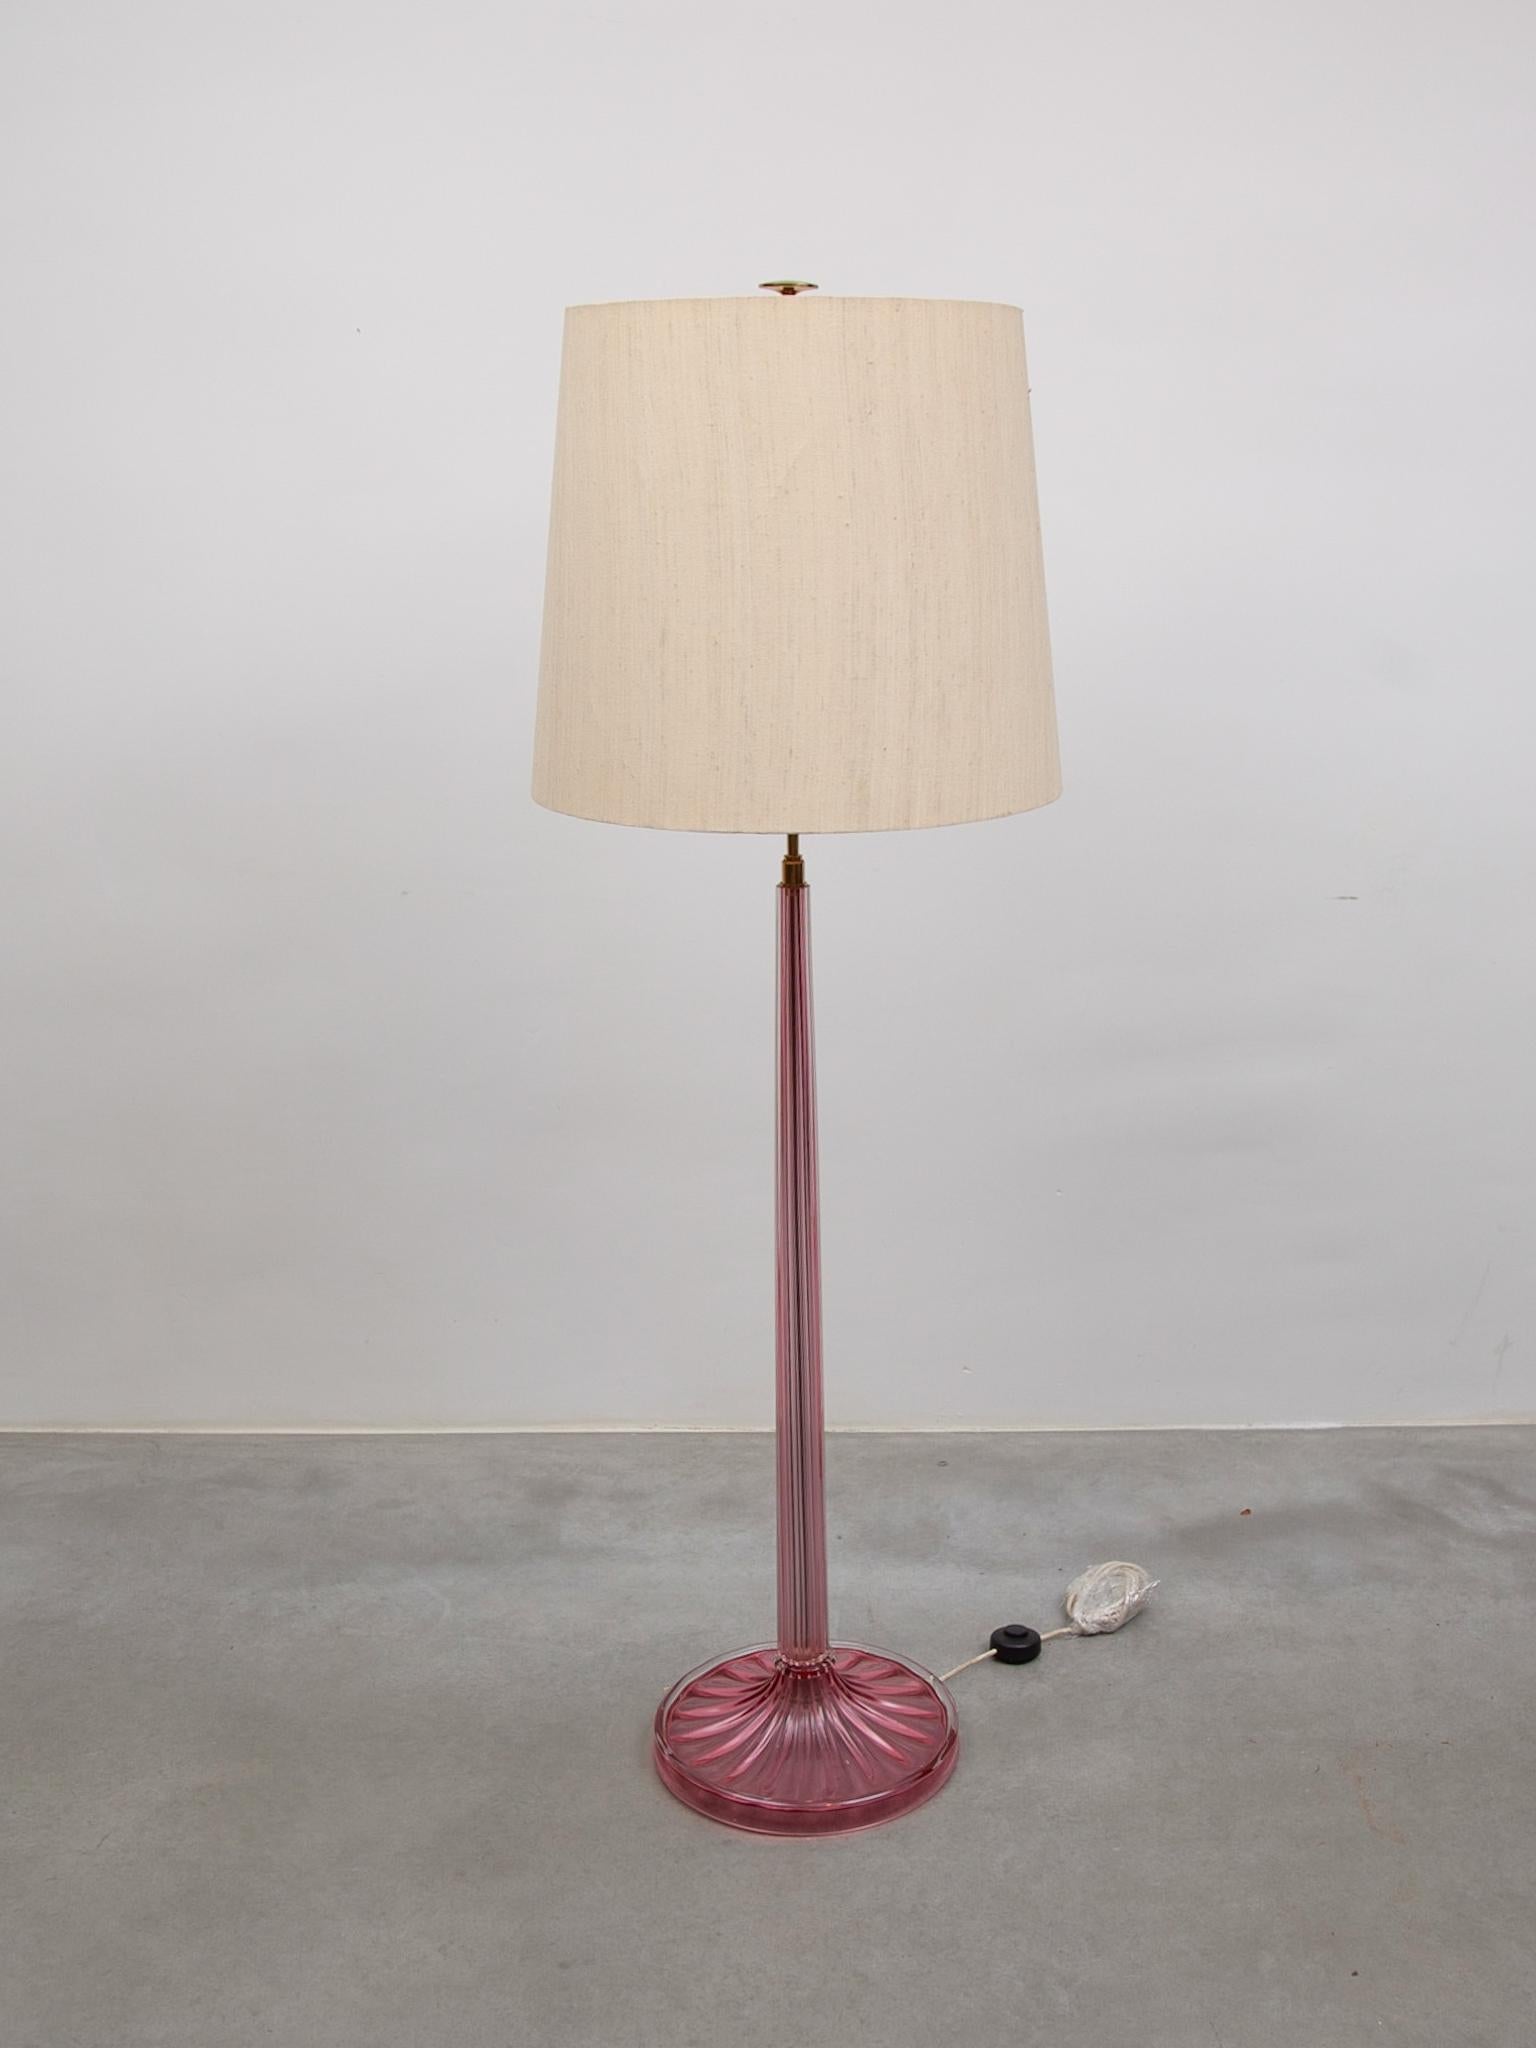 Barovier e Tosso Pink Art Glass Floor Lamp, Murano Blown Glass, 1950s, Italy In Good Condition For Sale In Antwerp, BE